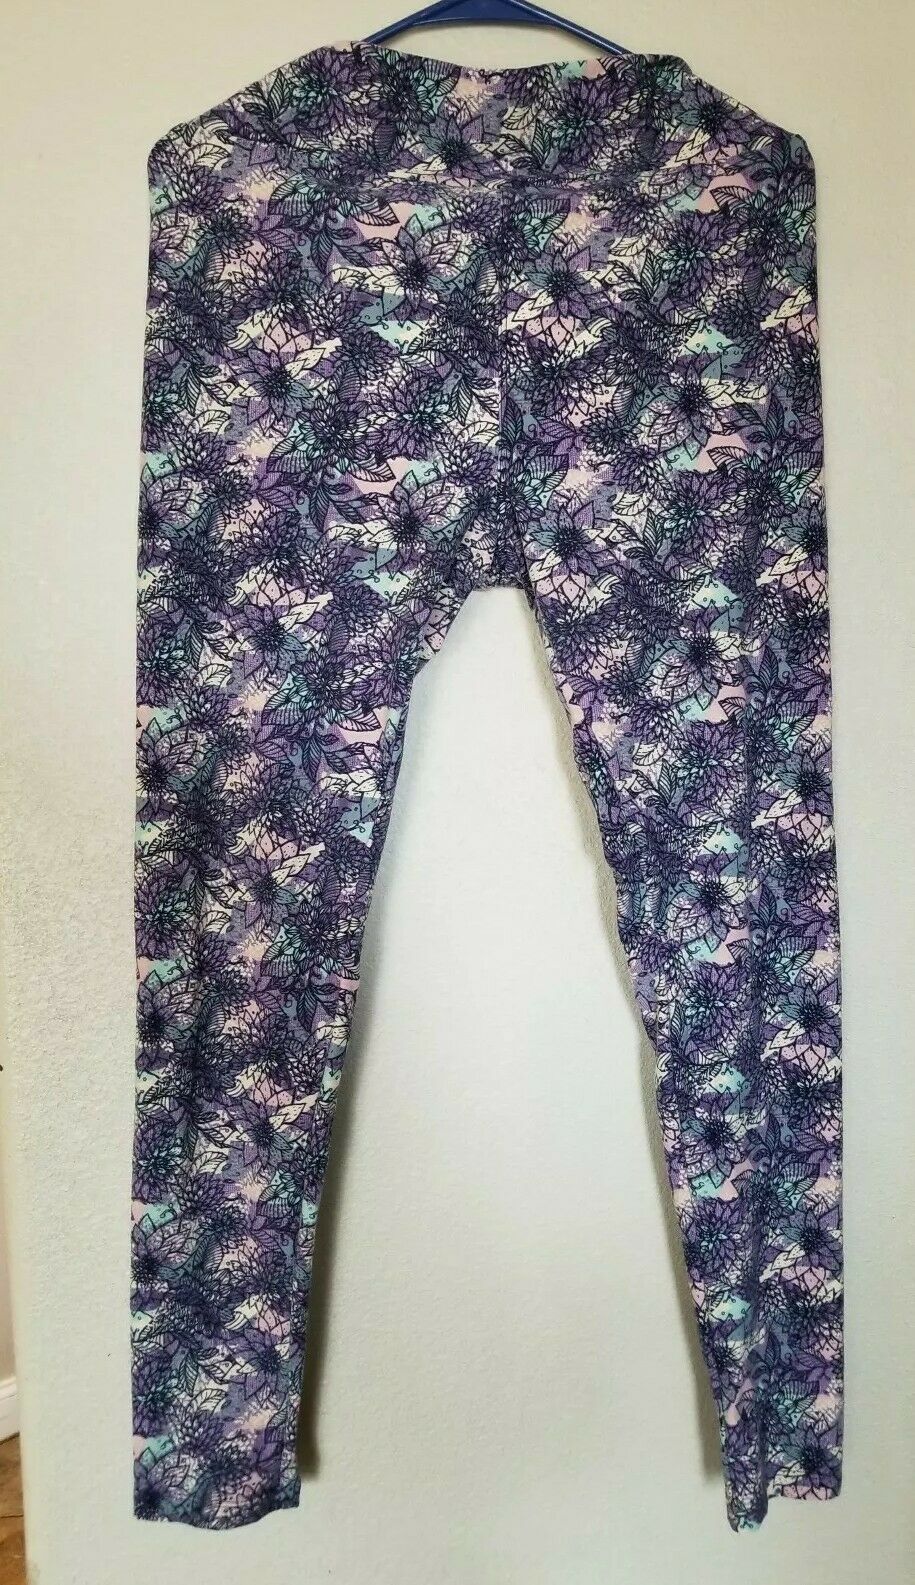 LuLaRoe Leggings TALL and CURVY Size undefined - $15 - From My